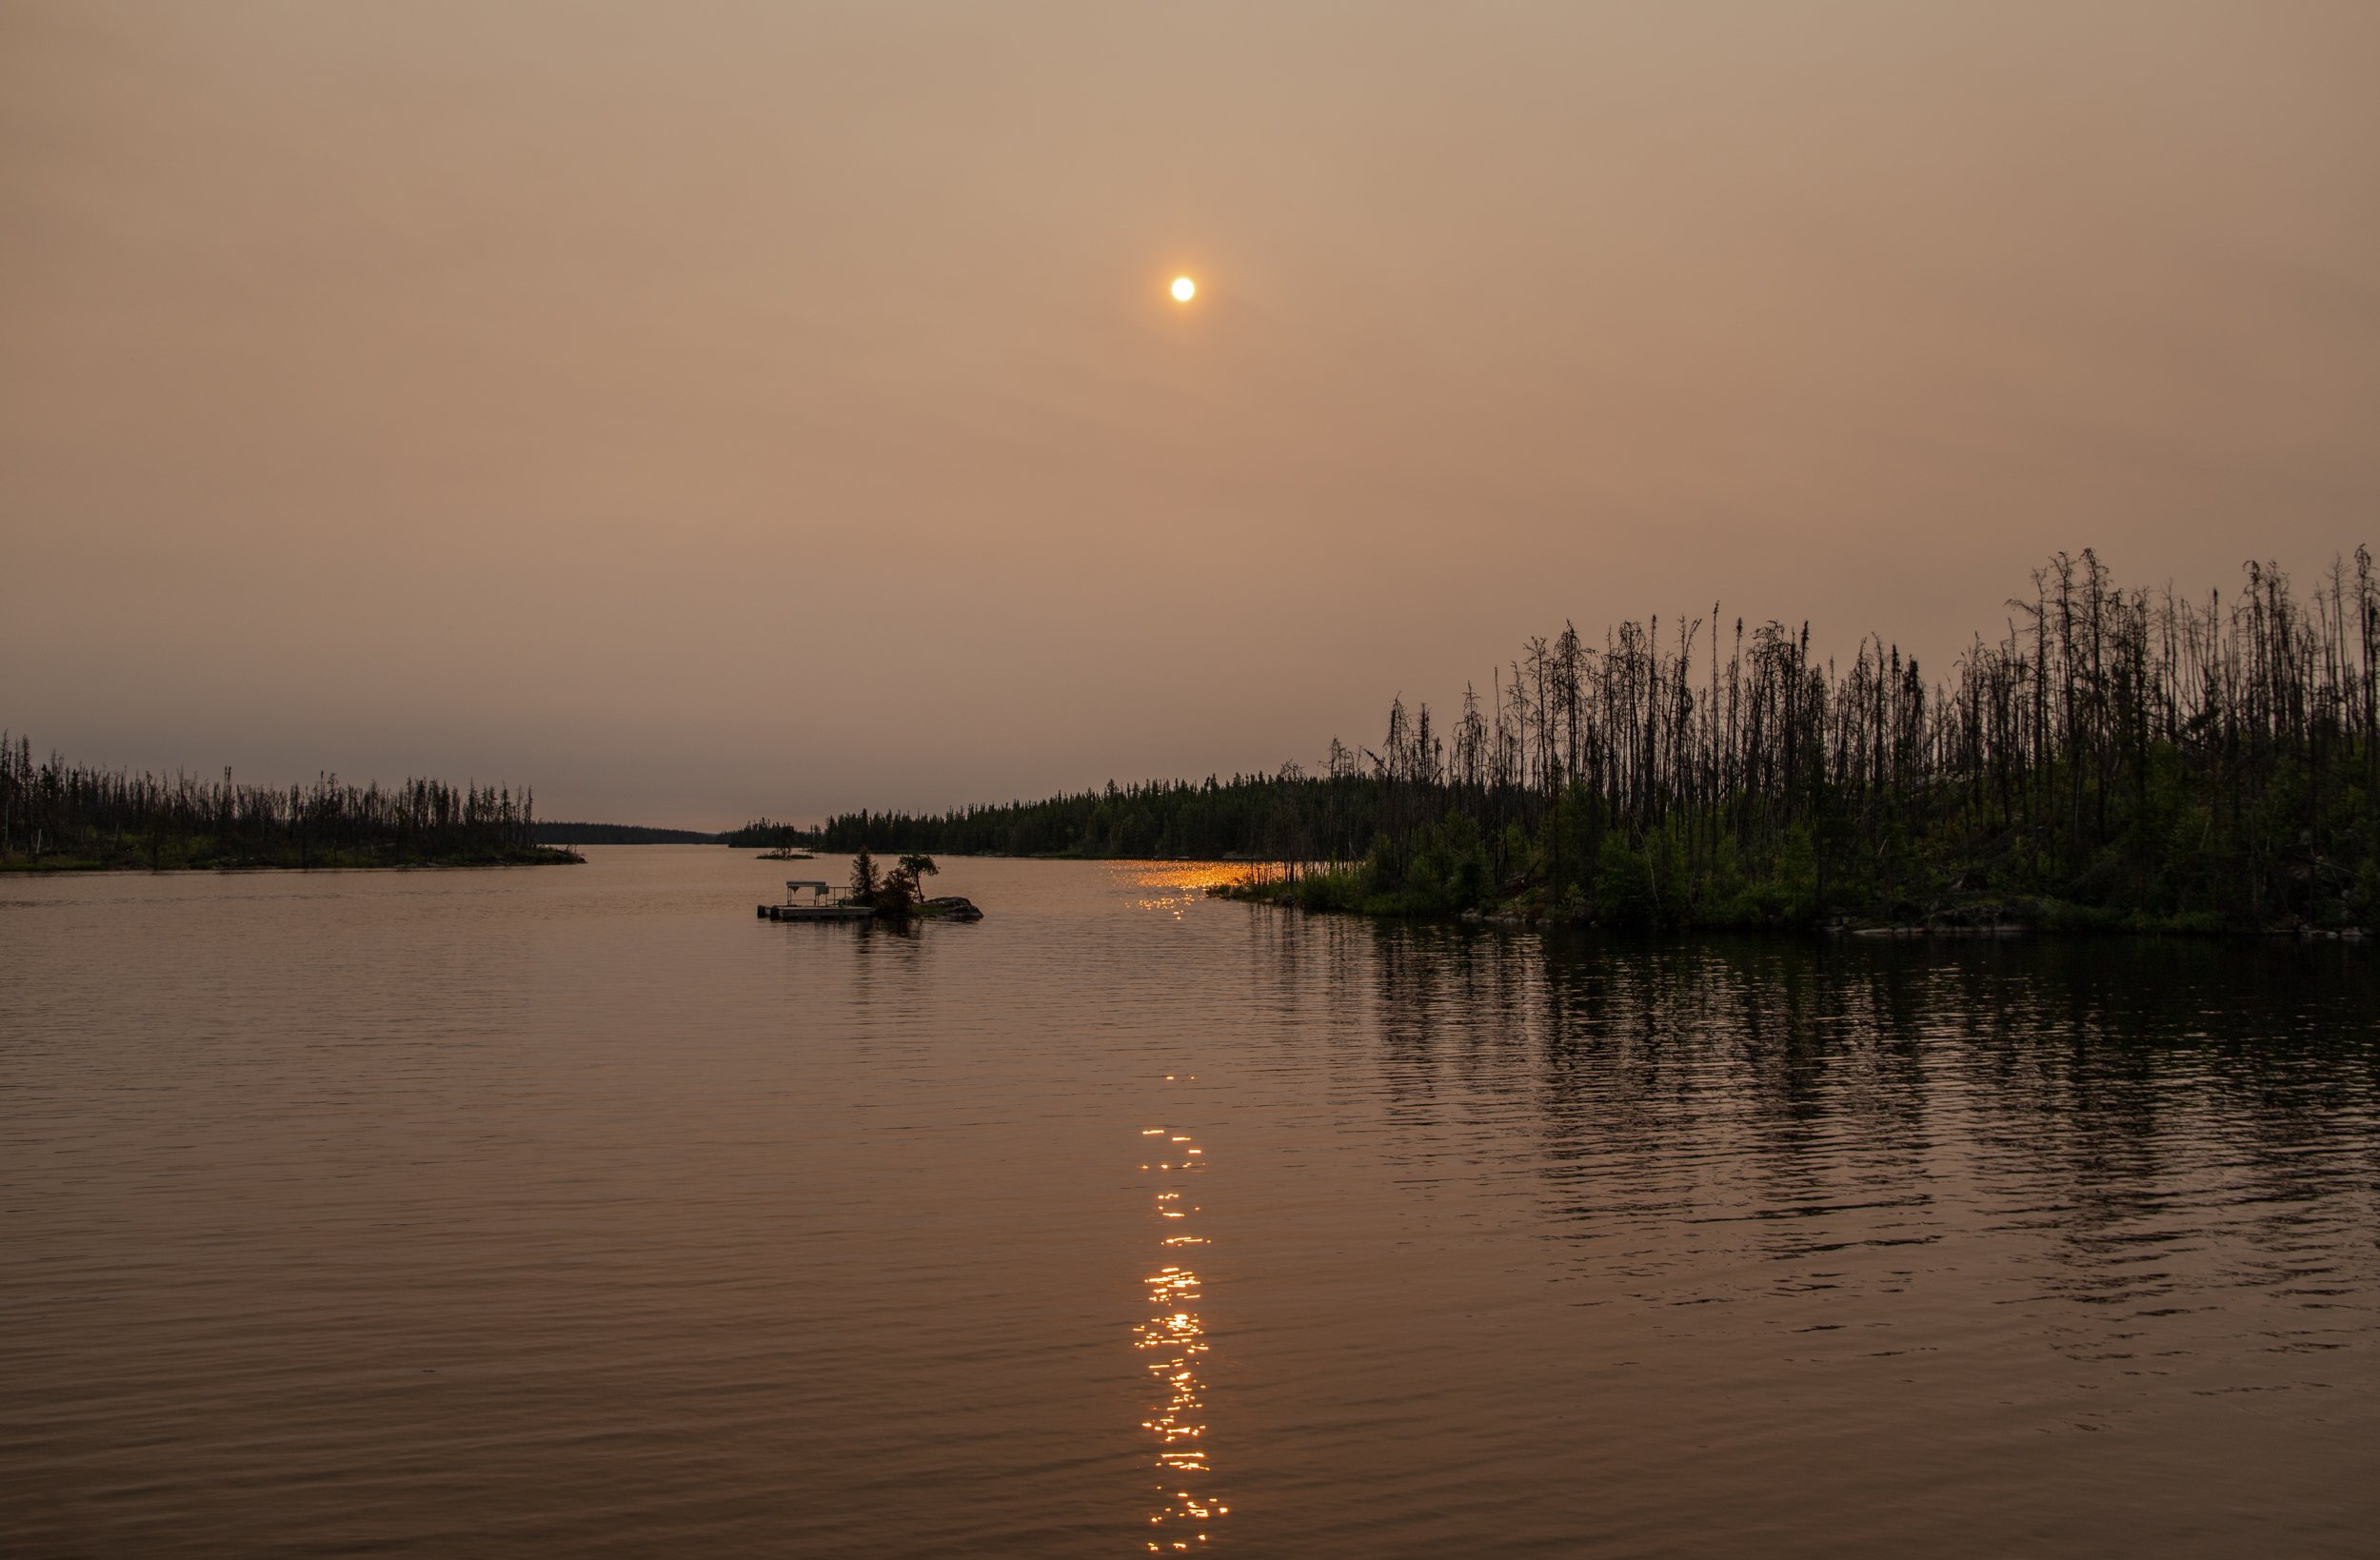  Early morning sunrise over the bay at Grayling Lodge. The orange sun is burning it’s way through the thick smoke from surrounding forest fires.  